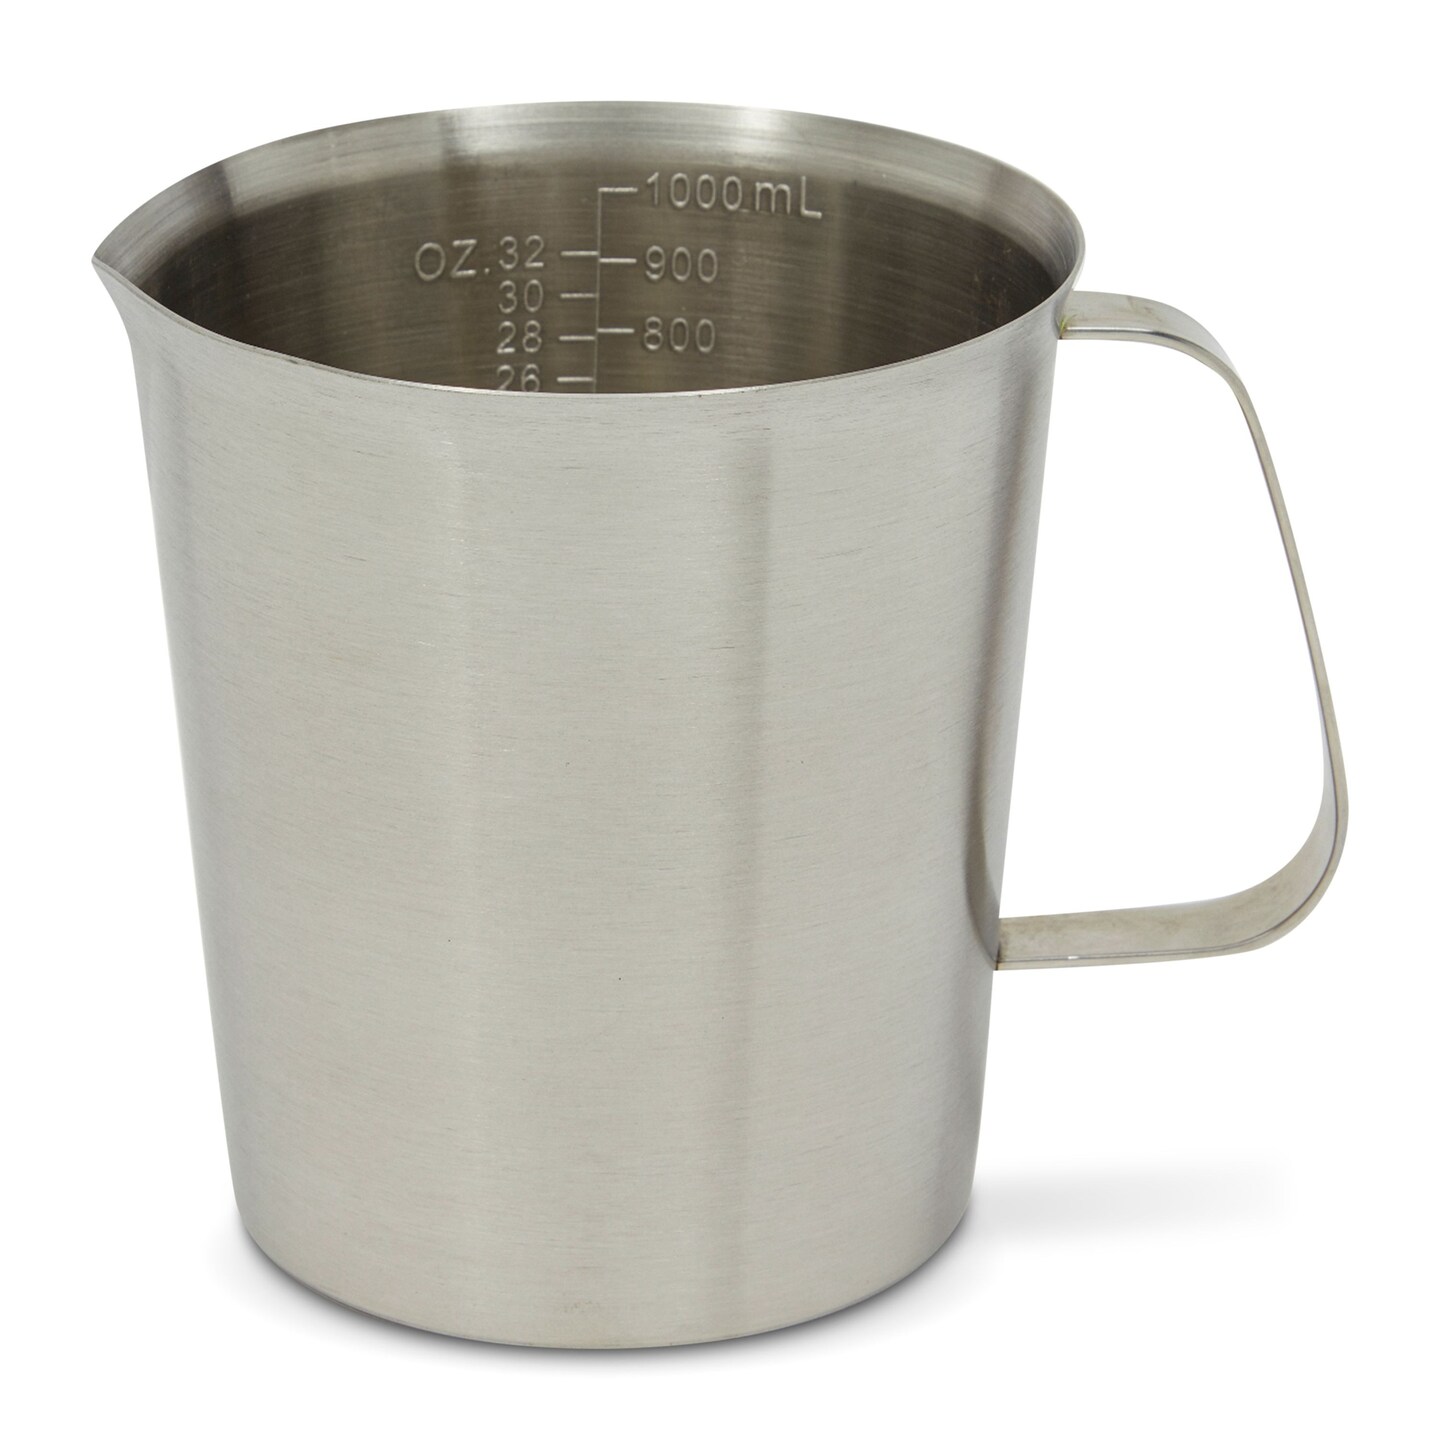 32 oz Stainless Steel Measuring Cup with Handle, Metal Pitcher with Ounces  and Milliliters Marking (1000 ml)